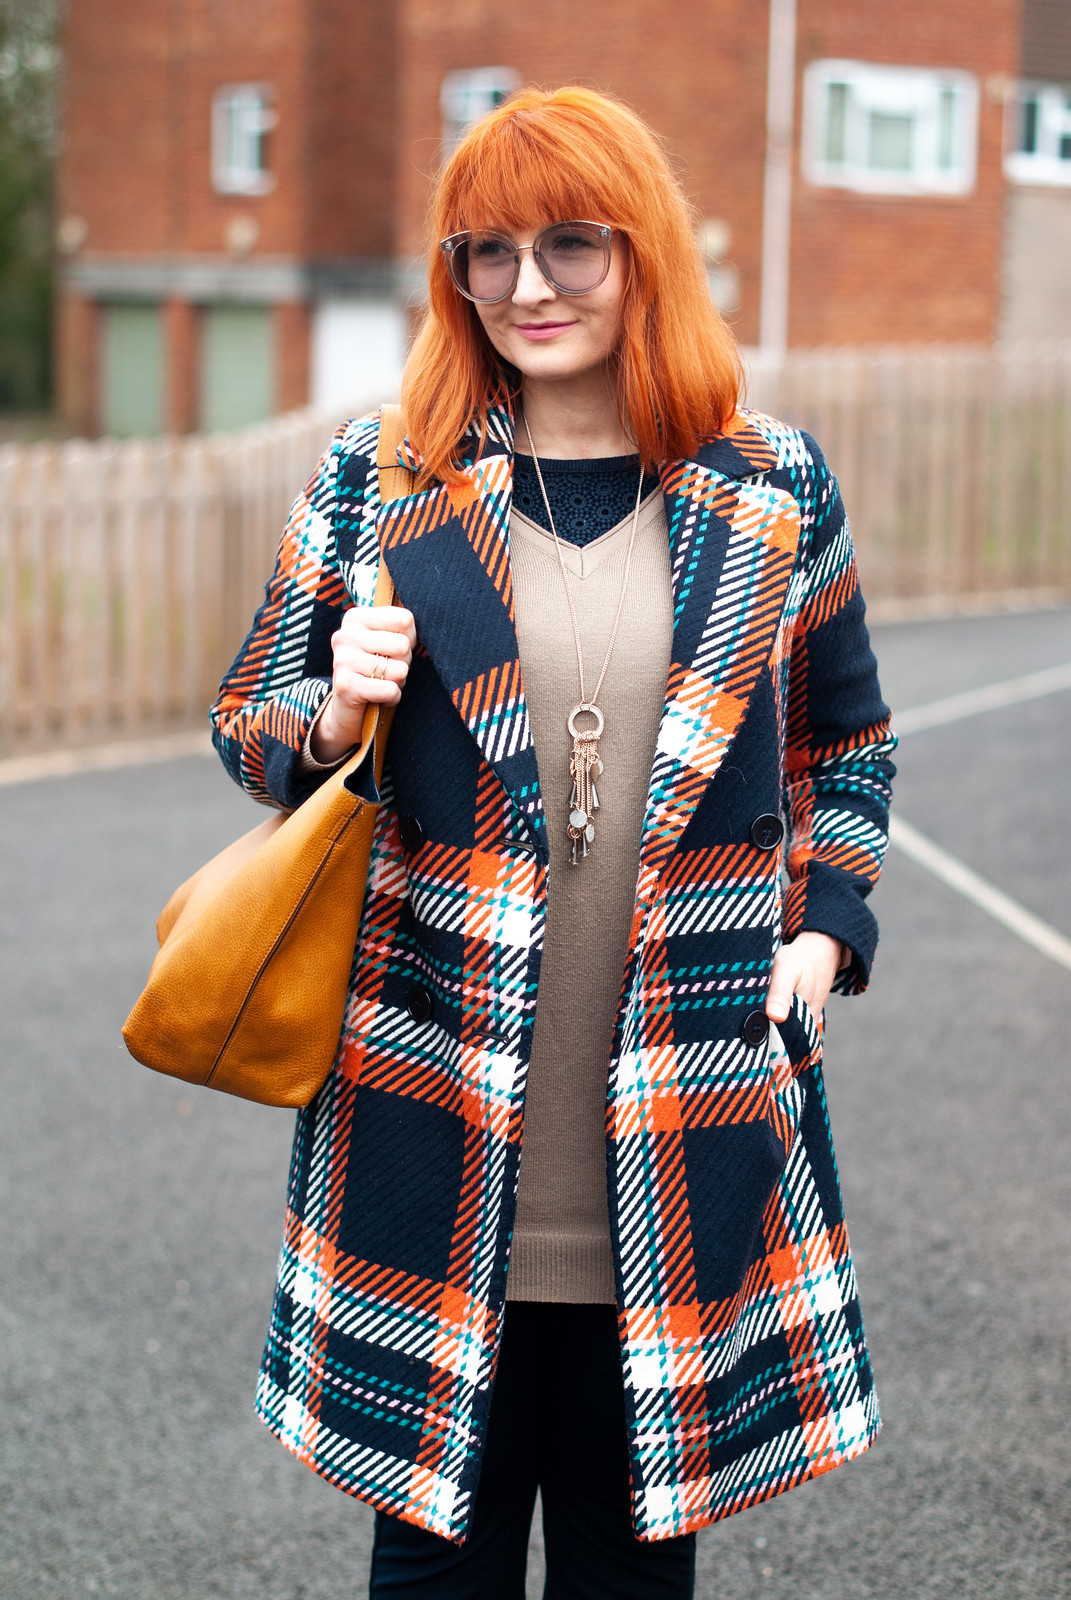 Over 40 Style: Dressing in Shades of Two Basic Colours (Navy and Orange) | Not Dressed As Lamb